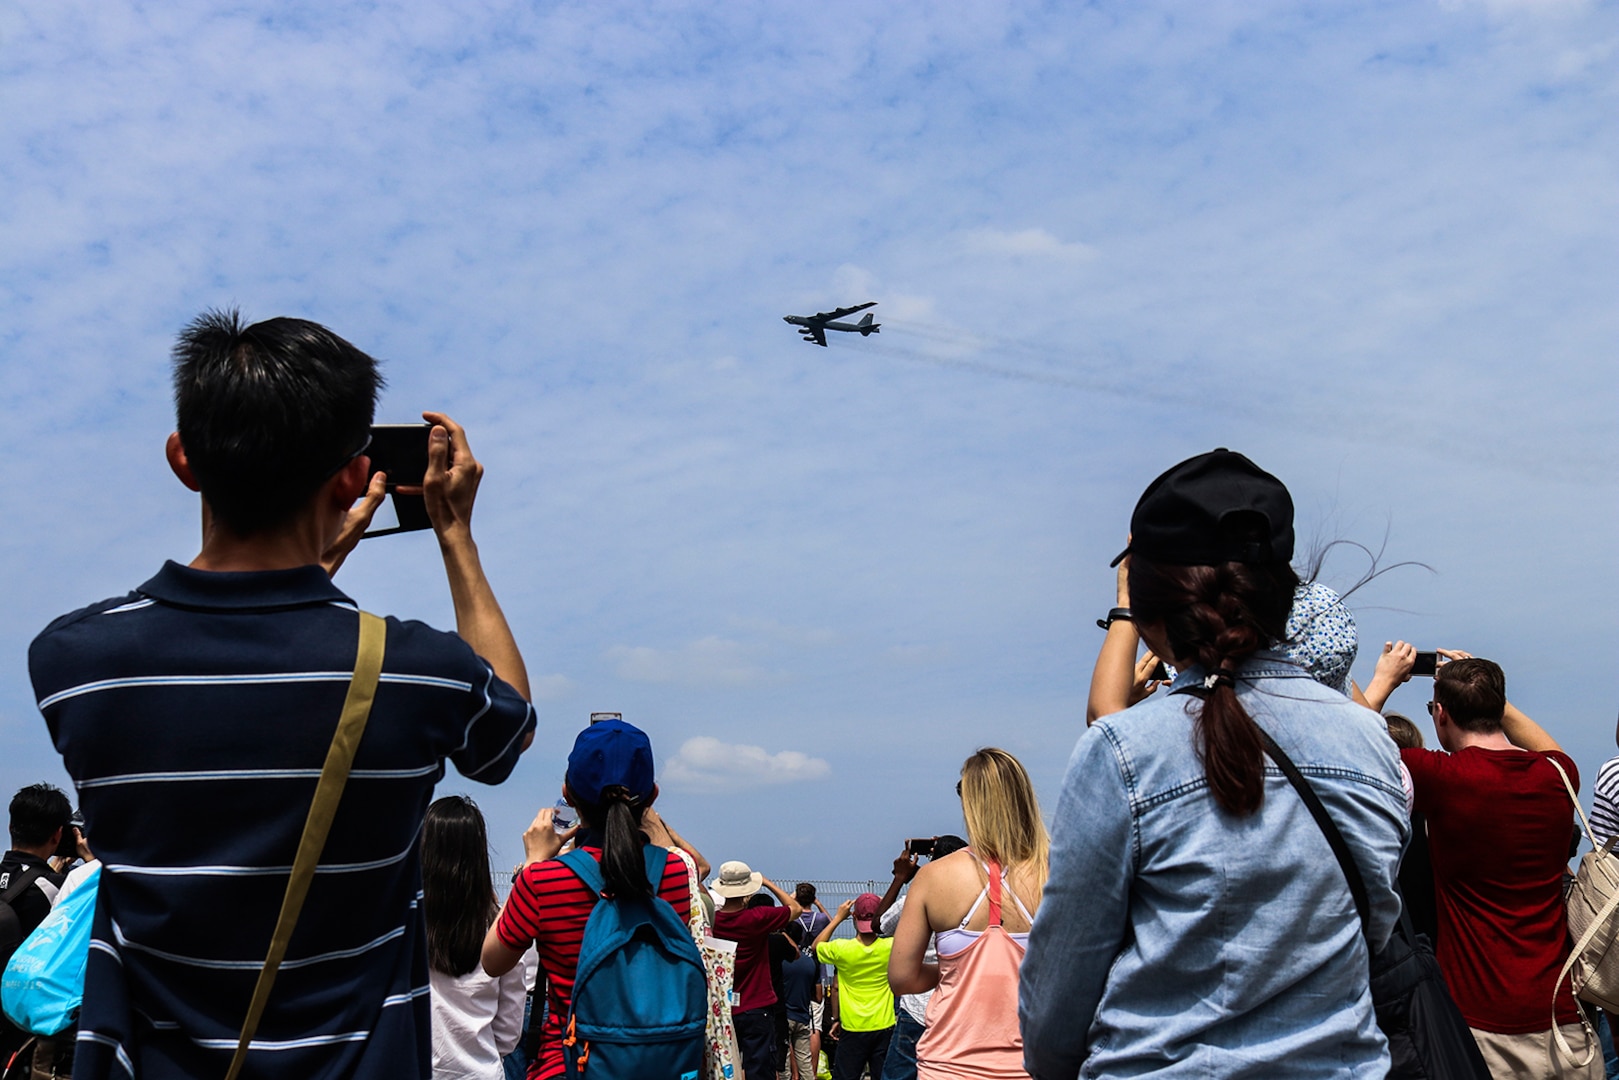 B-52 performs flyover during Singapore International Air Show